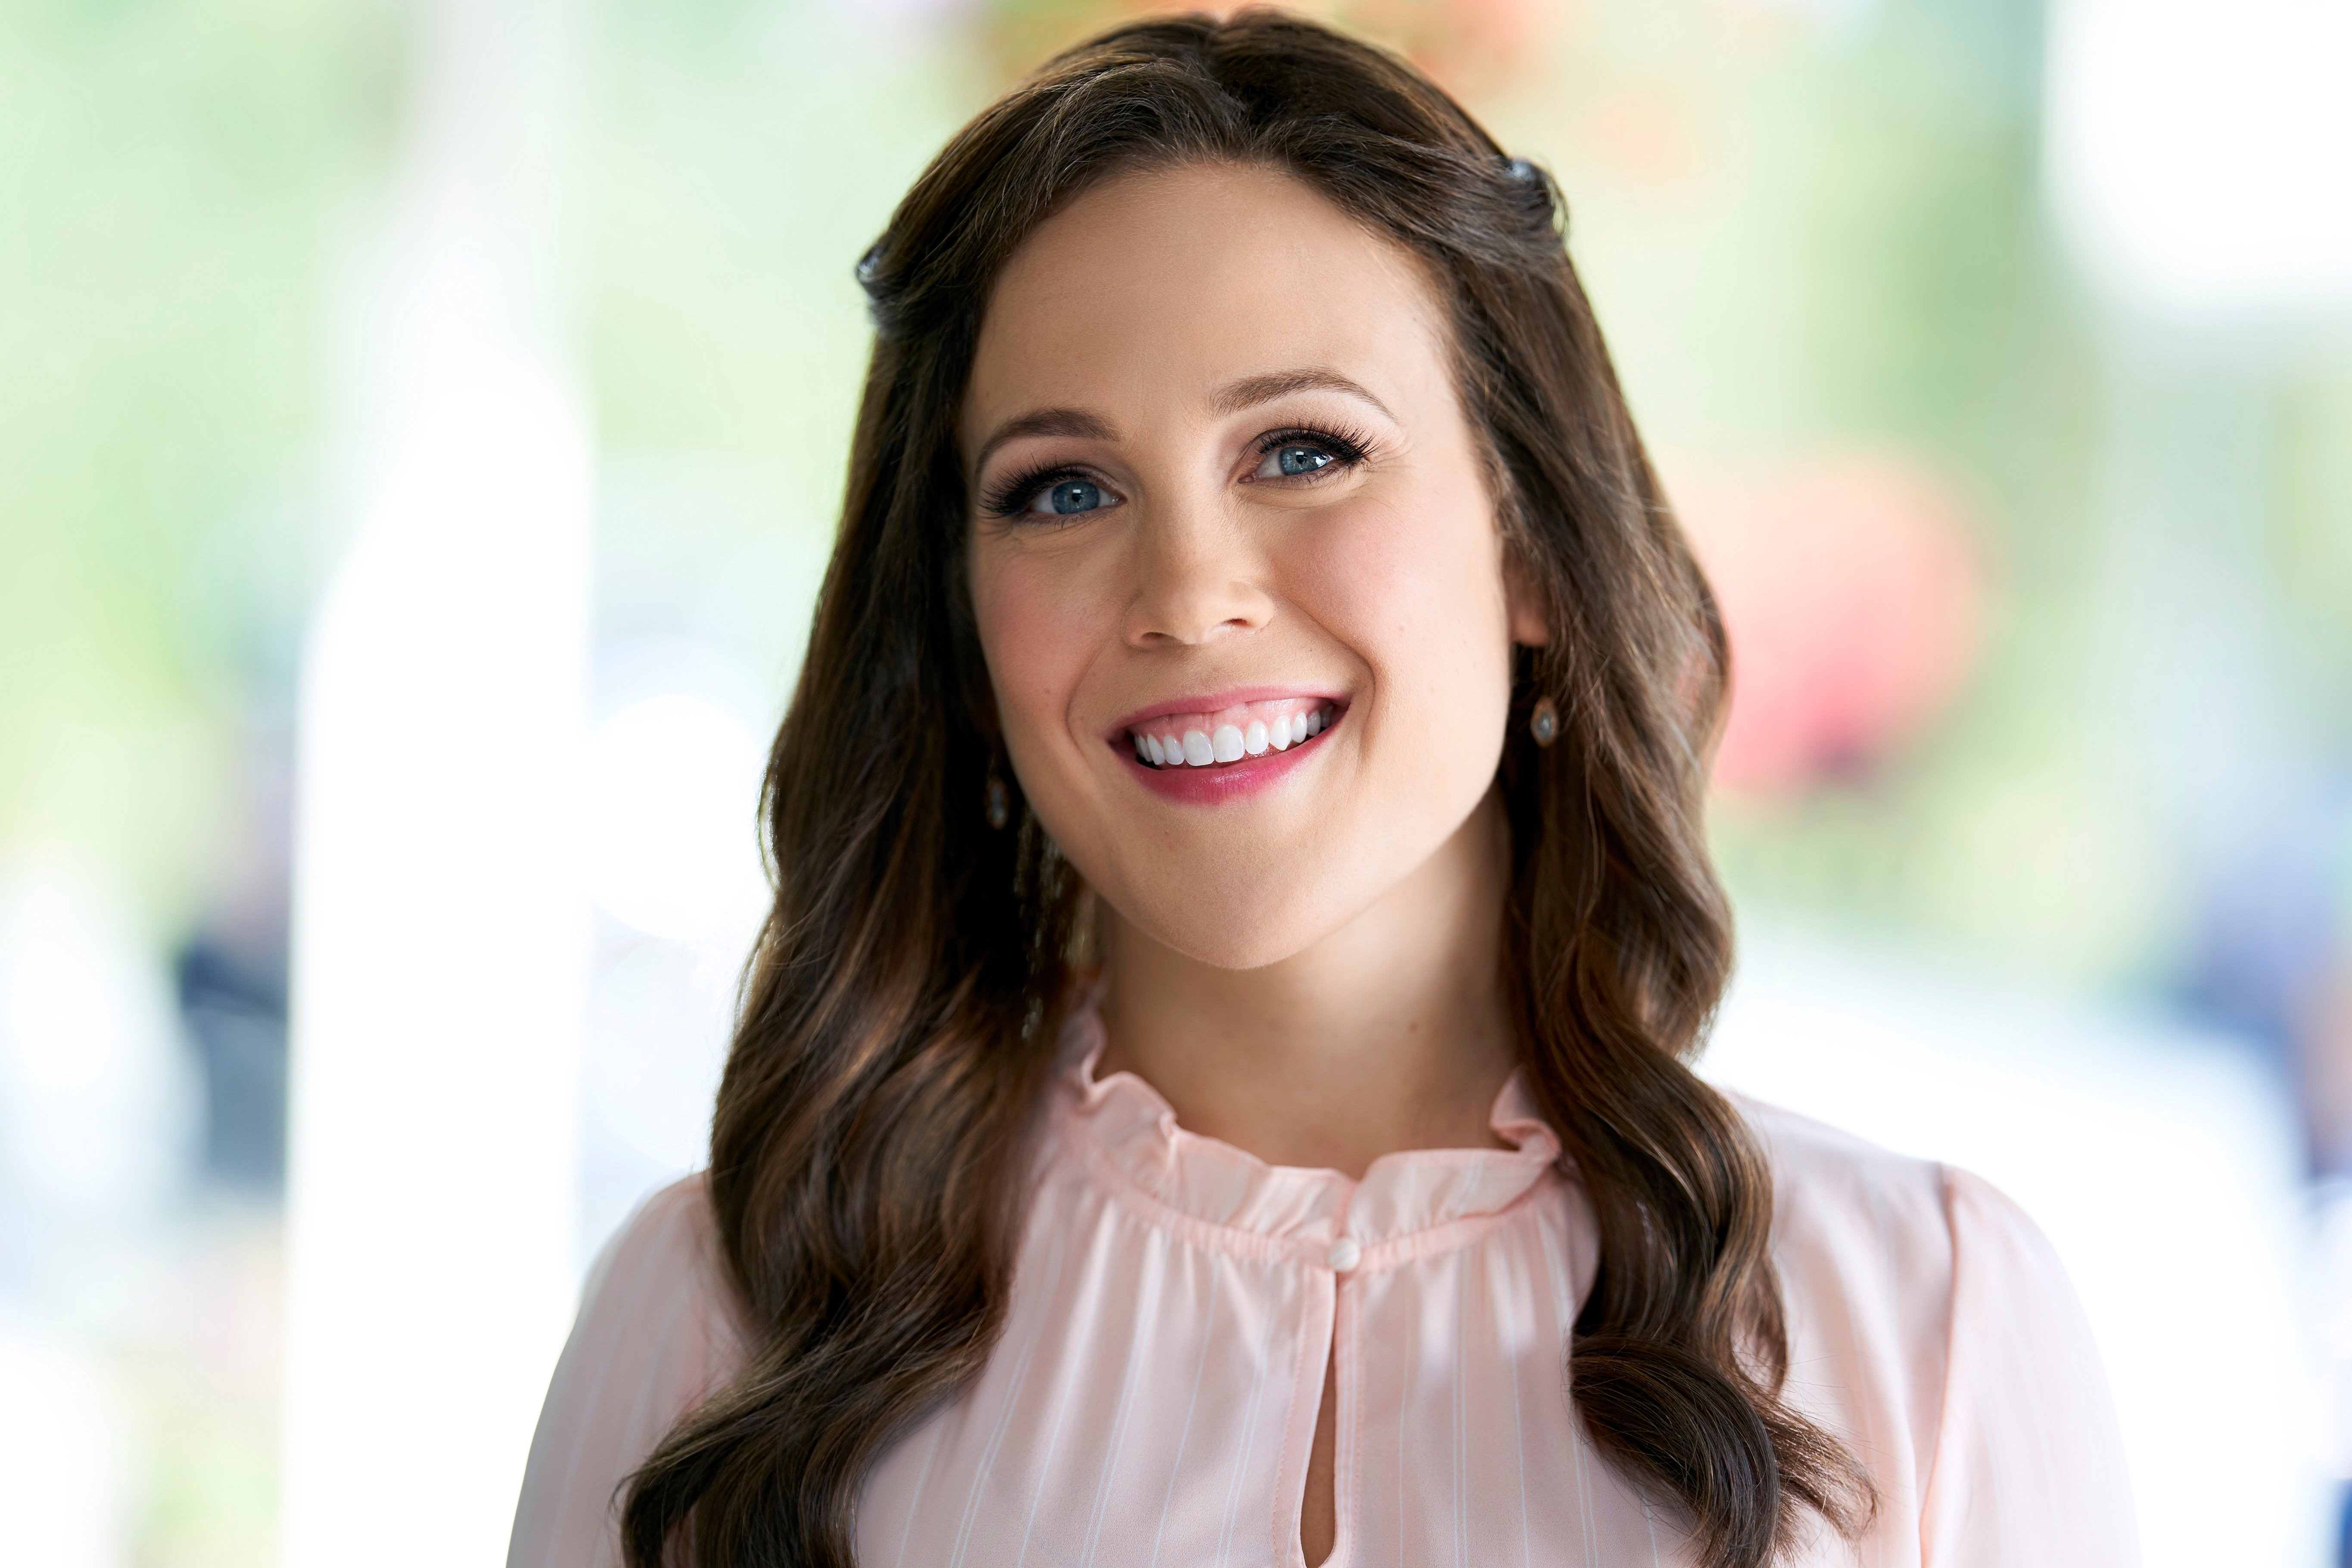 When Calls The Heart Why Did Erin Krakow Replace Poppy Drayton As Elizabeth After The Original Tv Movie